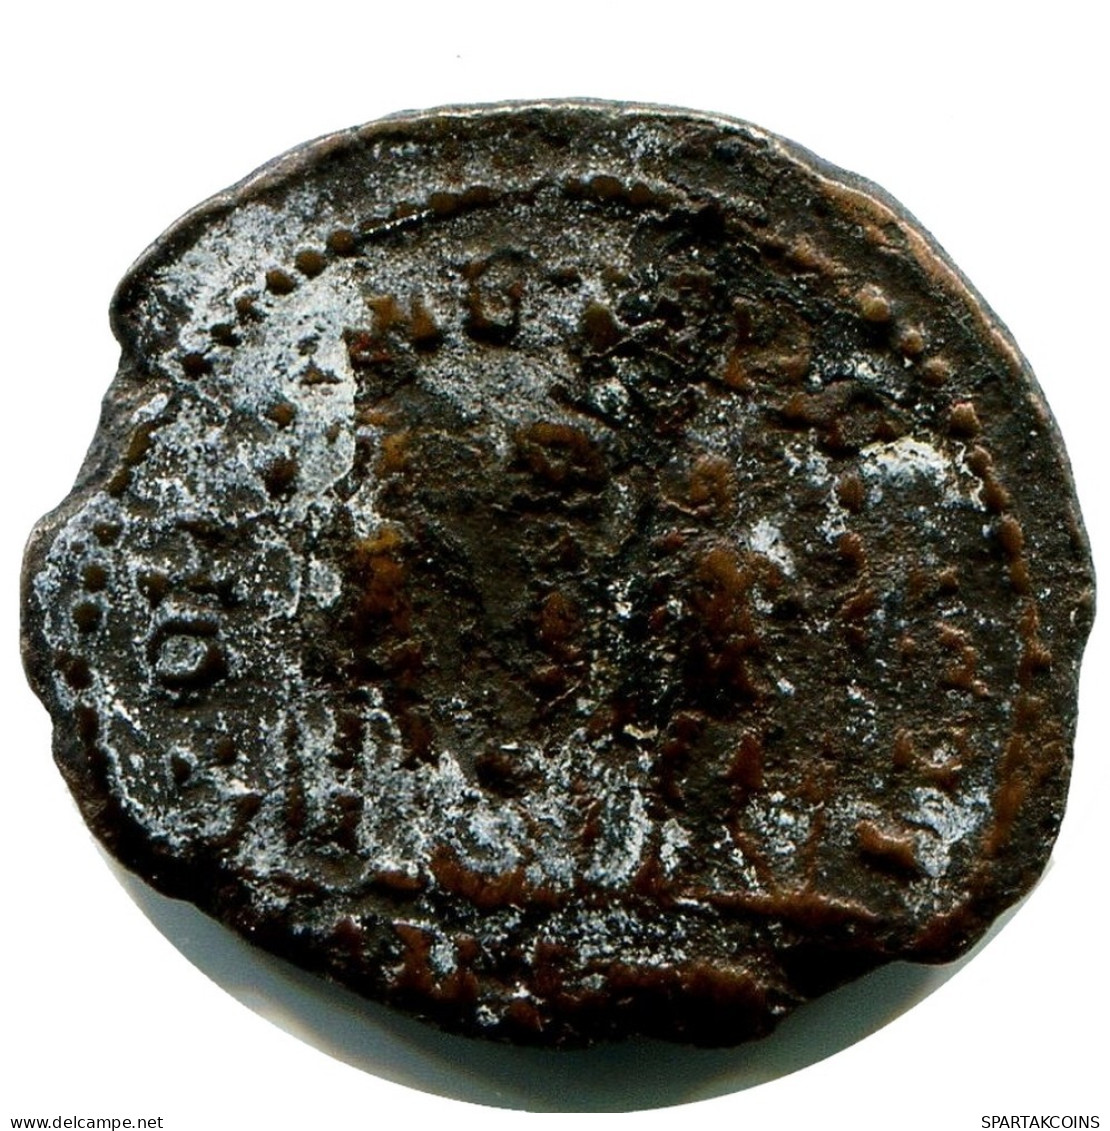 CONSTANS MINTED IN ANTIOCH FOUND IN IHNASYAH HOARD EGYPT #ANC11862.14.F.A - The Christian Empire (307 AD Tot 363 AD)